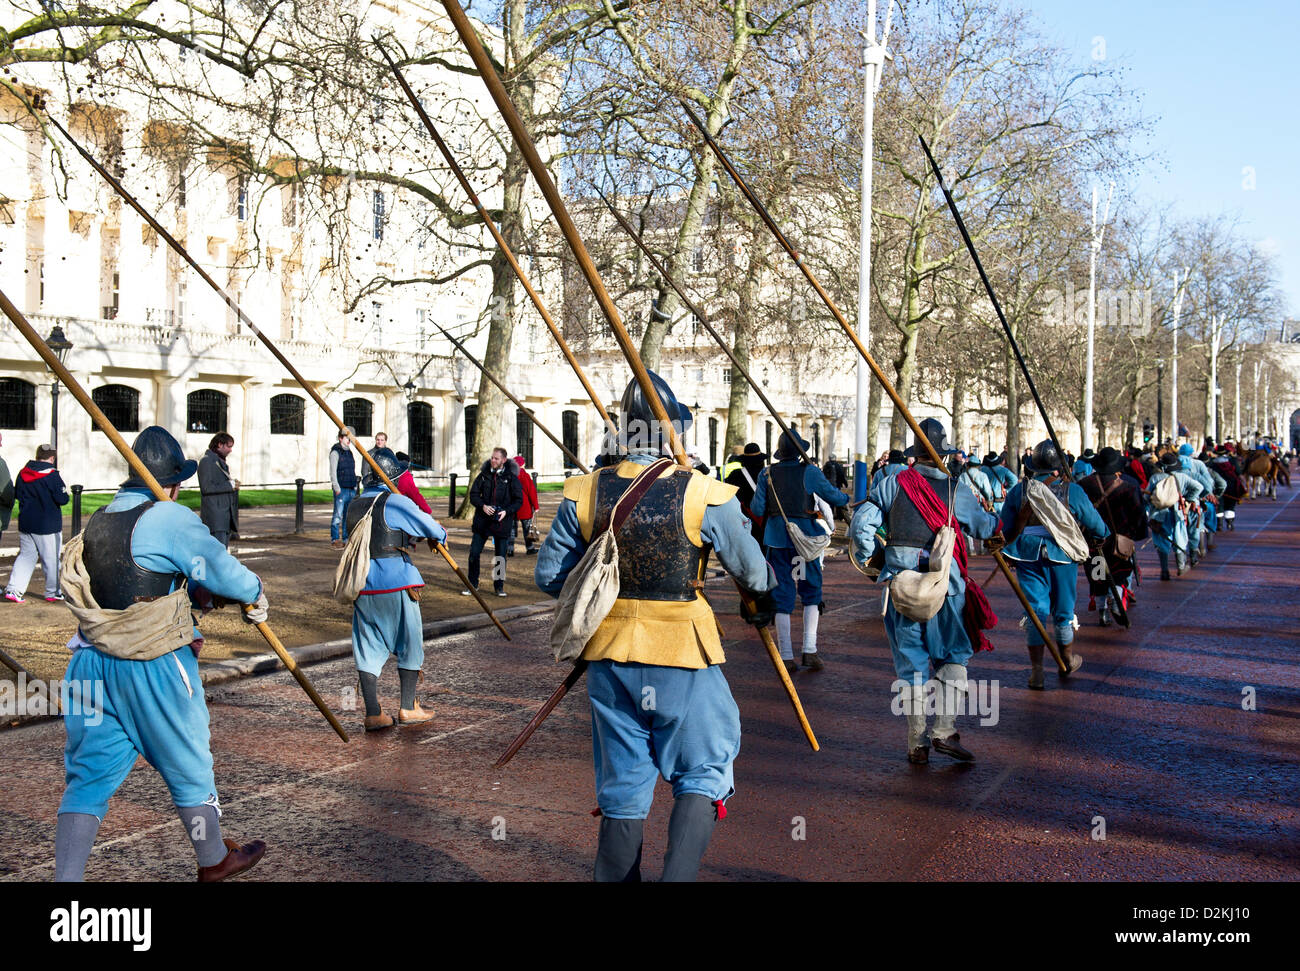 London, UK. 27th Jan, 2013. Members of the English Civil War Society gather on Pall Mall.  The English Civil War reenactors march to a service to commemorate the execution of King Charles I. Photographer: Gordon Scammell Stock Photo